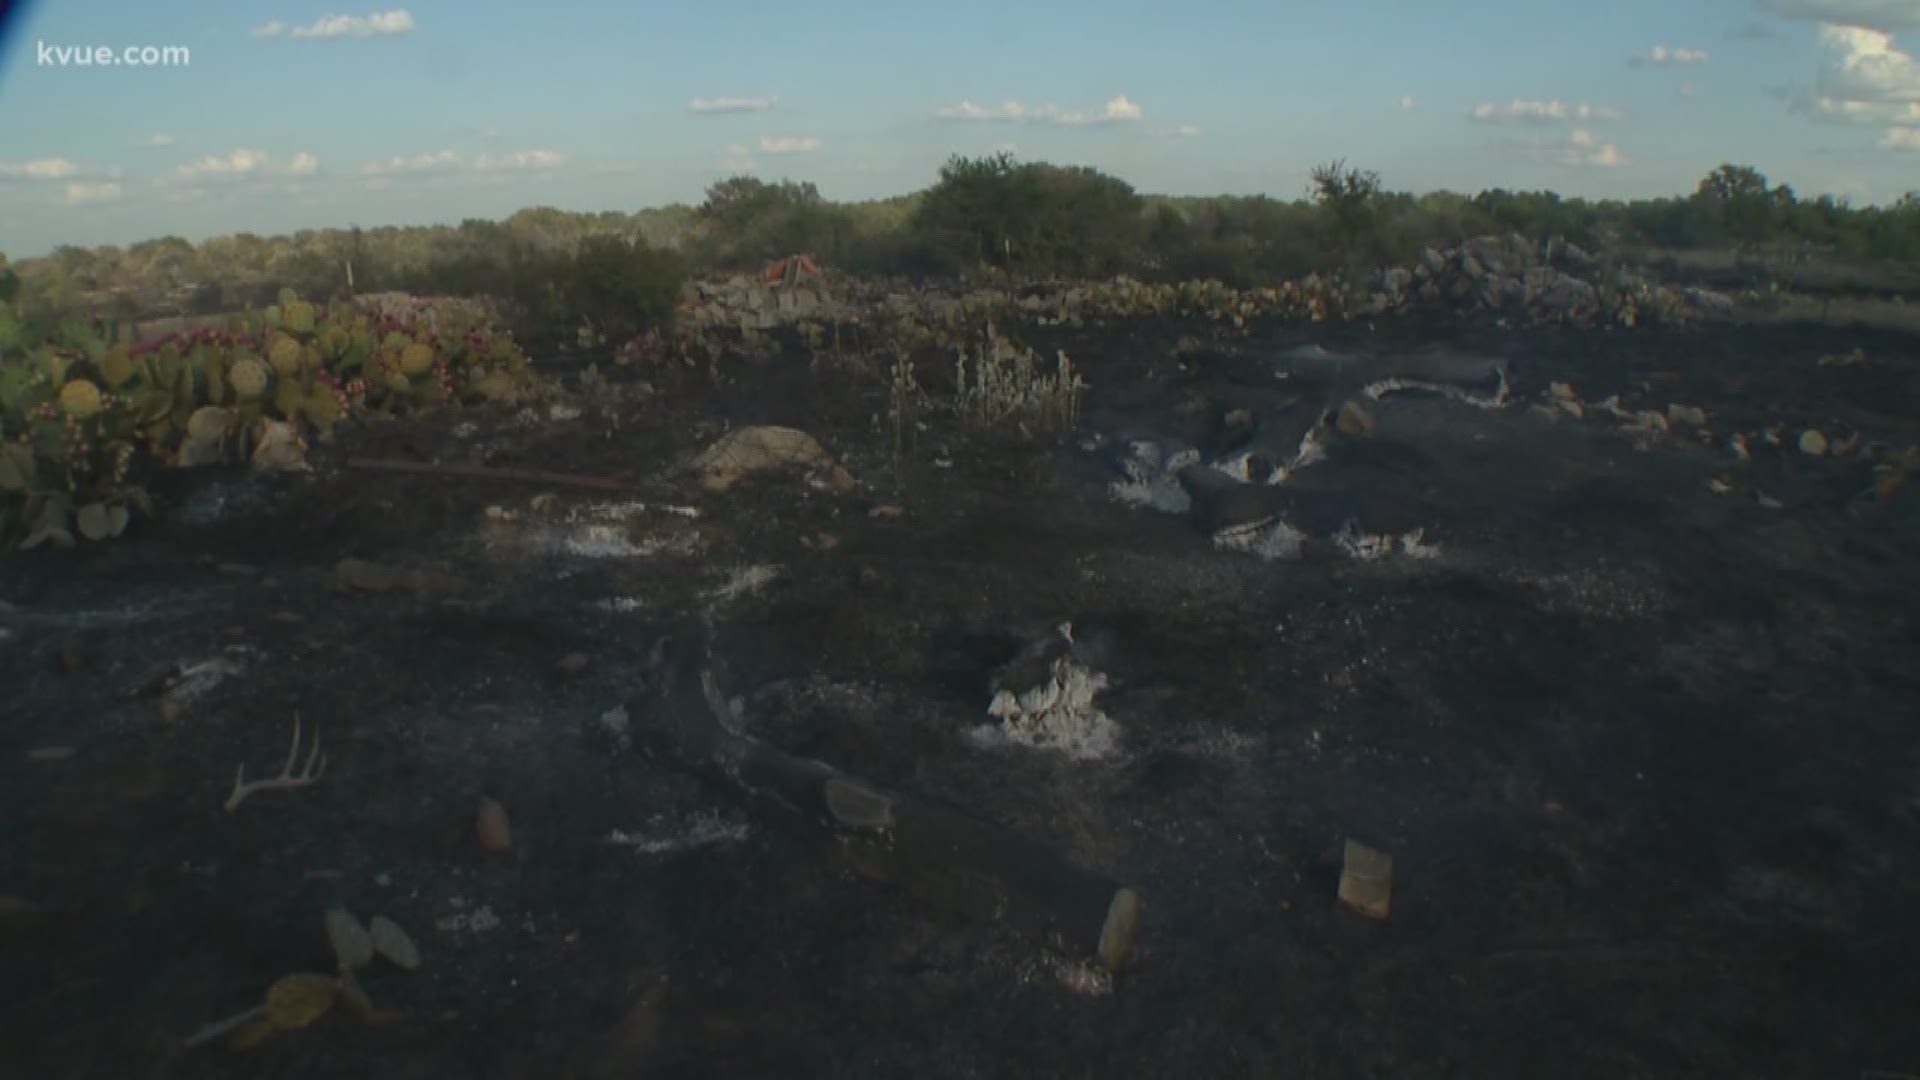 Crews have knocked out the wildfire near Horseshoe Bay Resort Airport in Llano County.